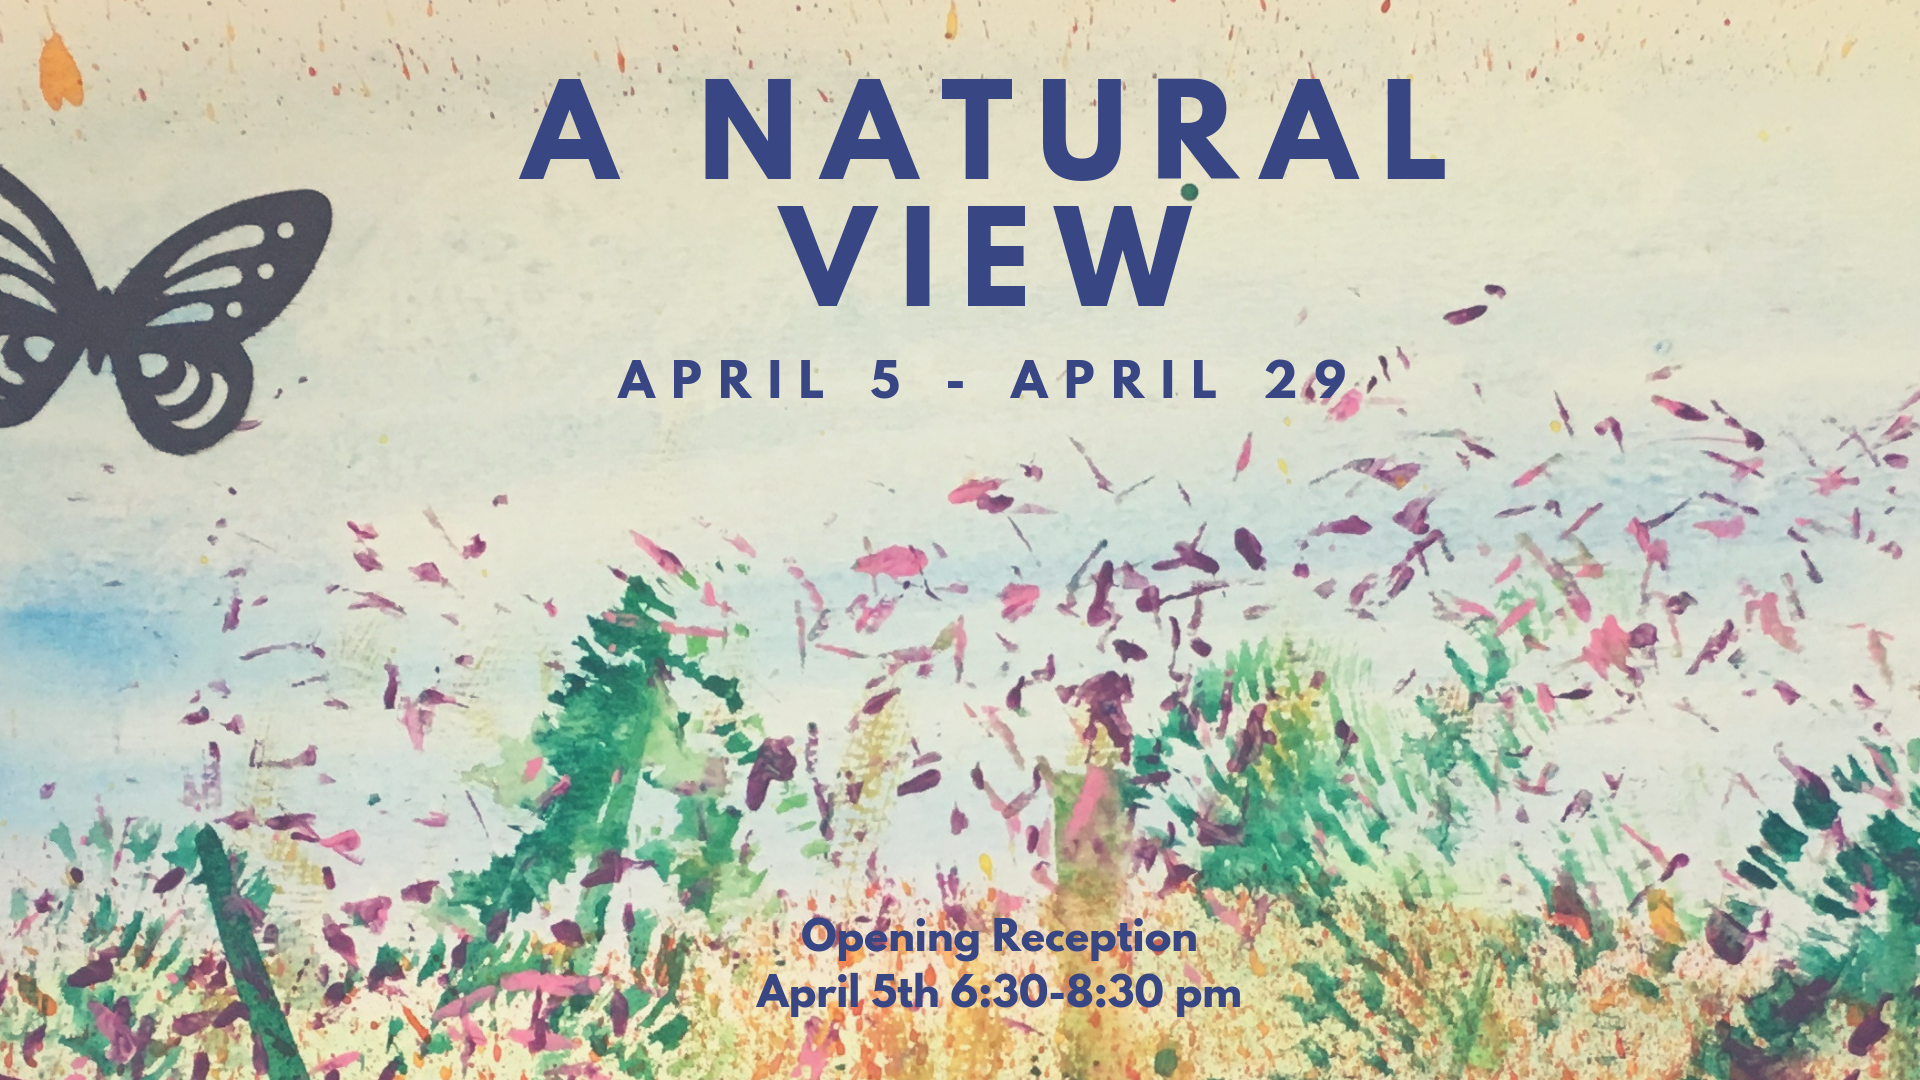 Natural View Facebook event.png